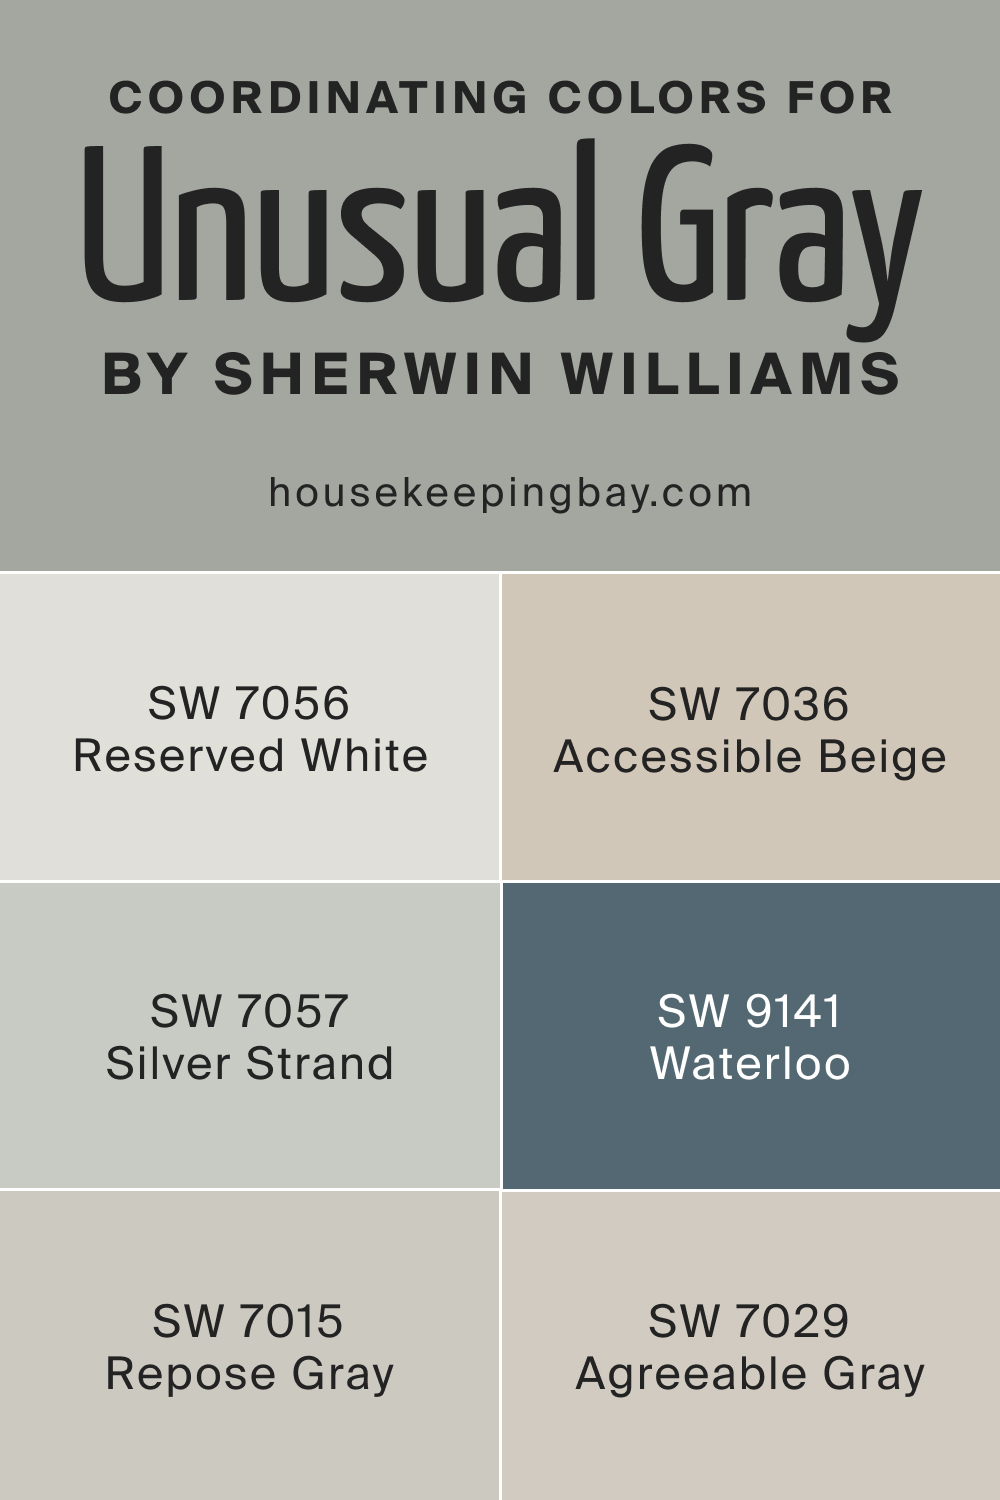 Coordinating Colors for SW 7059 Unusual Gray by Sherwin Williams